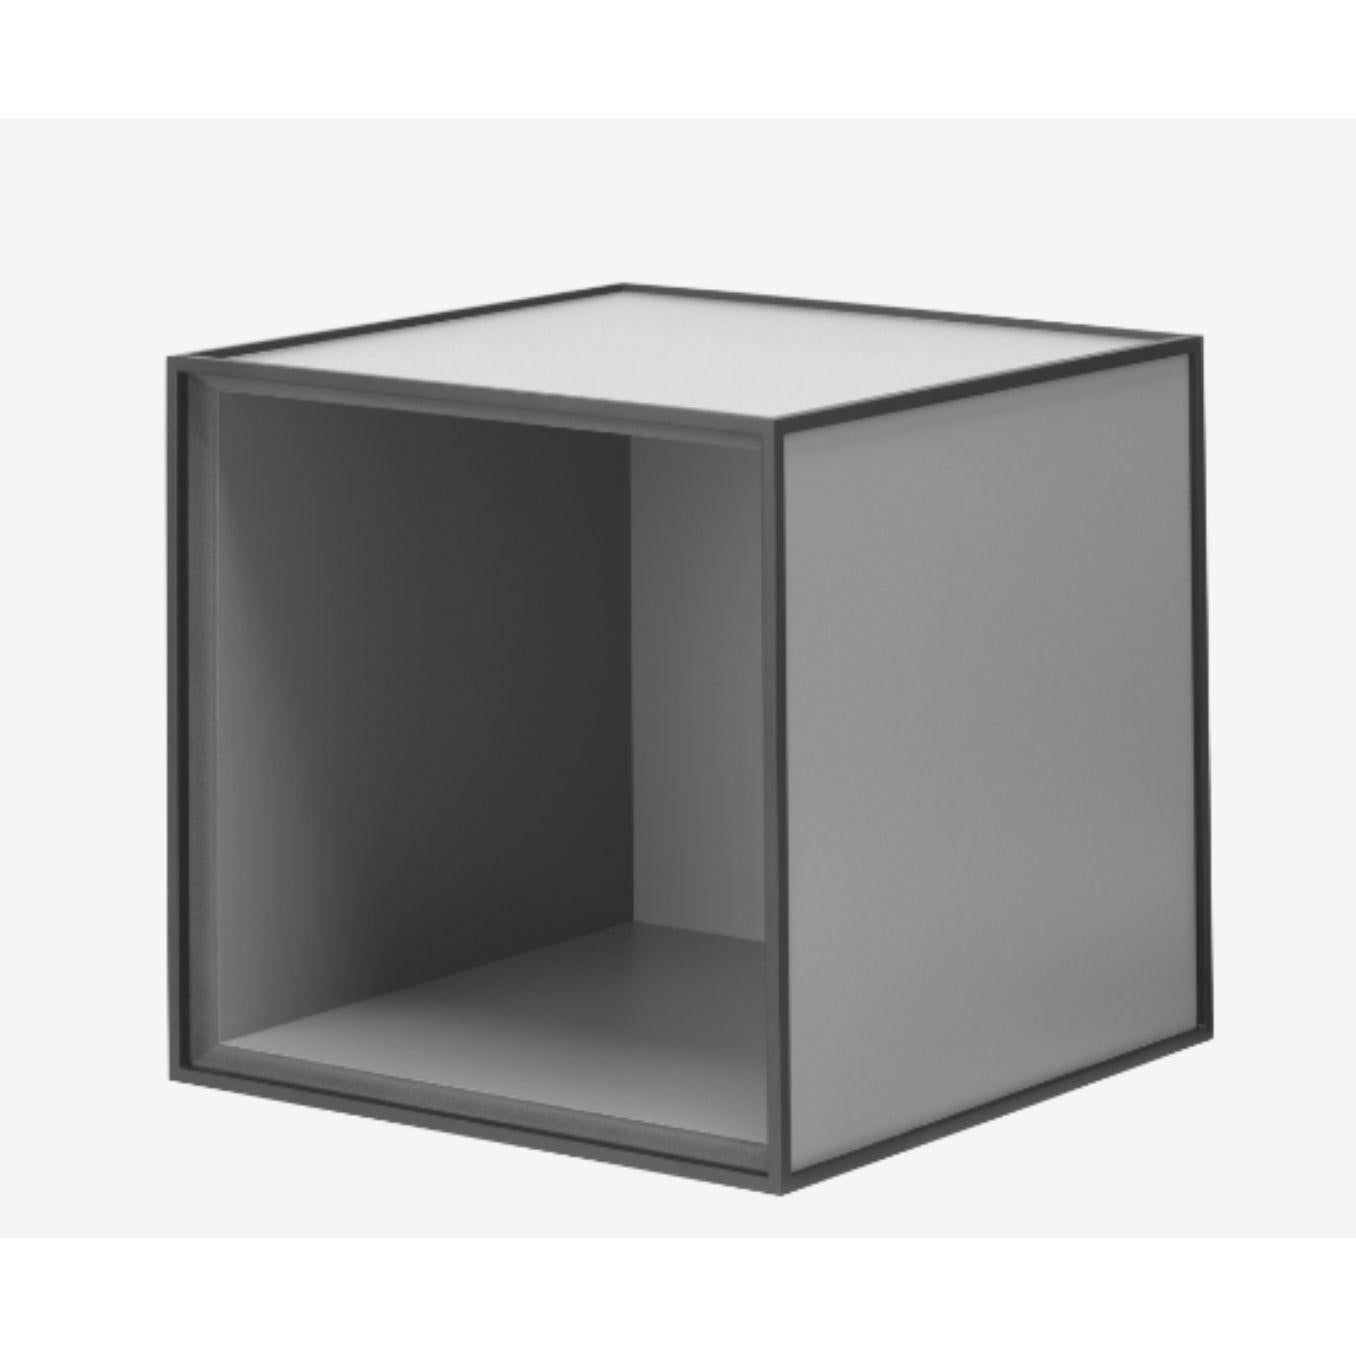 28 Dark grey frame box by Lassen.
Dimensions: W 28 x D 28 x H 28 cm.
Materials: finér, melamin, melamin, melamine, metal, veneer, oak
Also available in different colours and dimensions. 

By Lassen is a Danish design brand focused on iconic